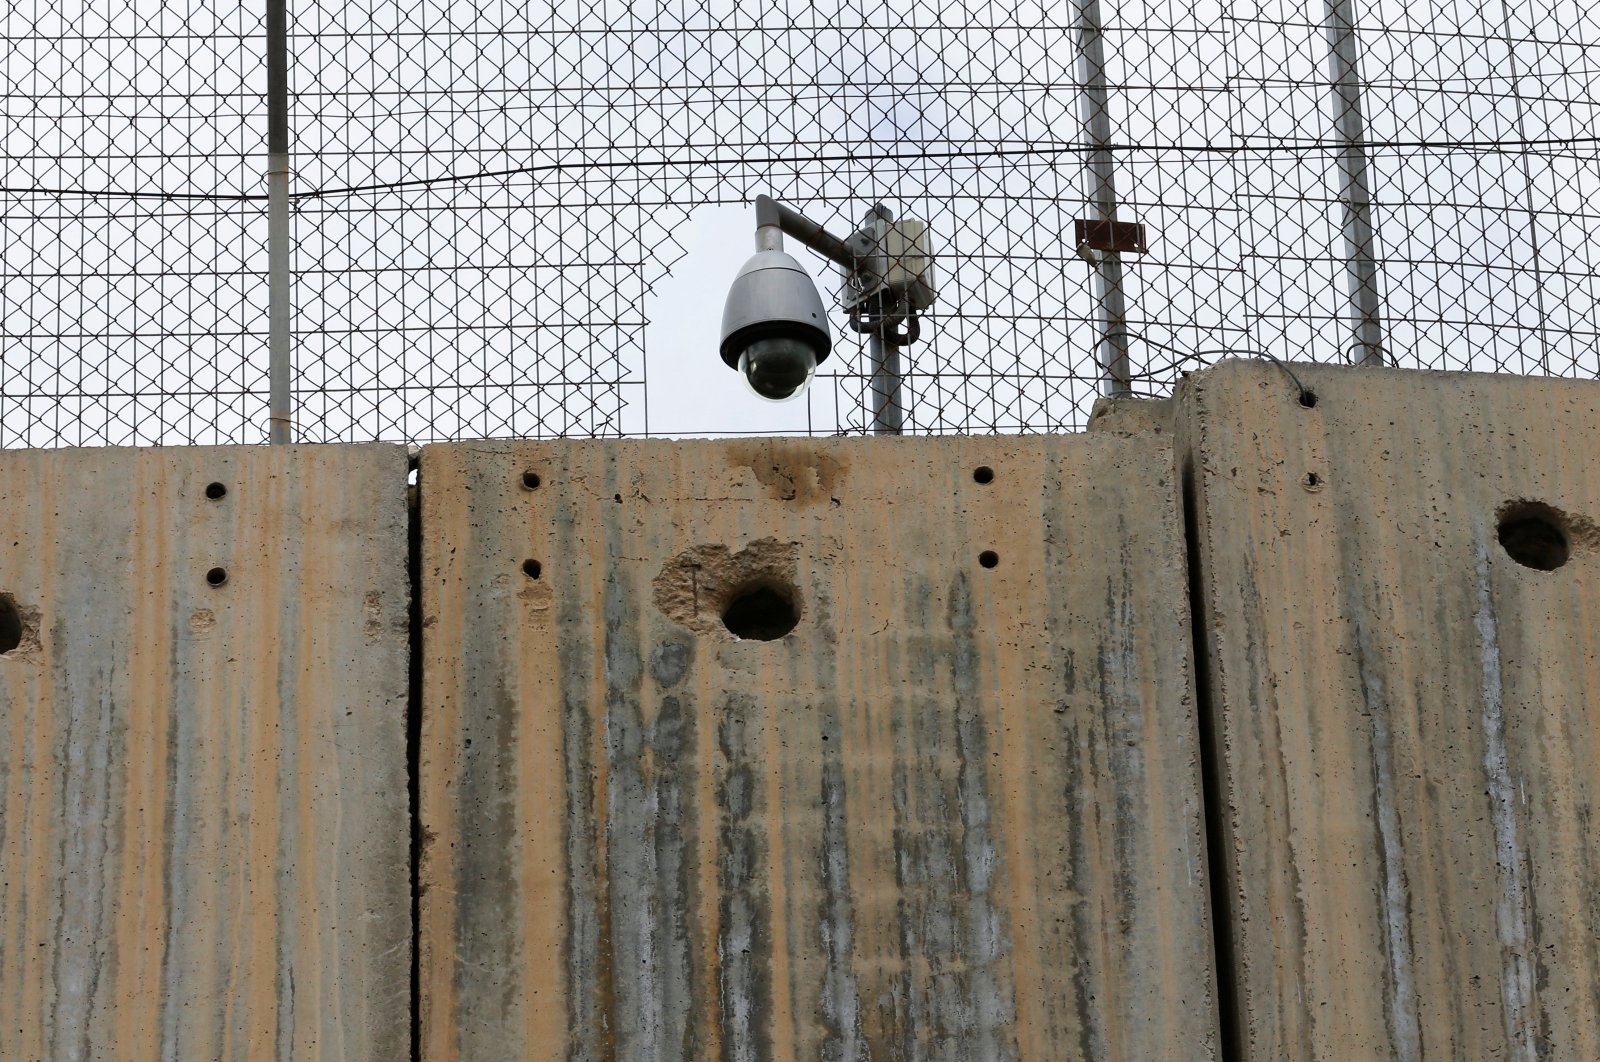 An Israeli security camera is seen on a section of the Israeli barrier in Bethlehem, in the occupied West Bank, Palestine, Feb. 1, 2022. (Reuters Photo)